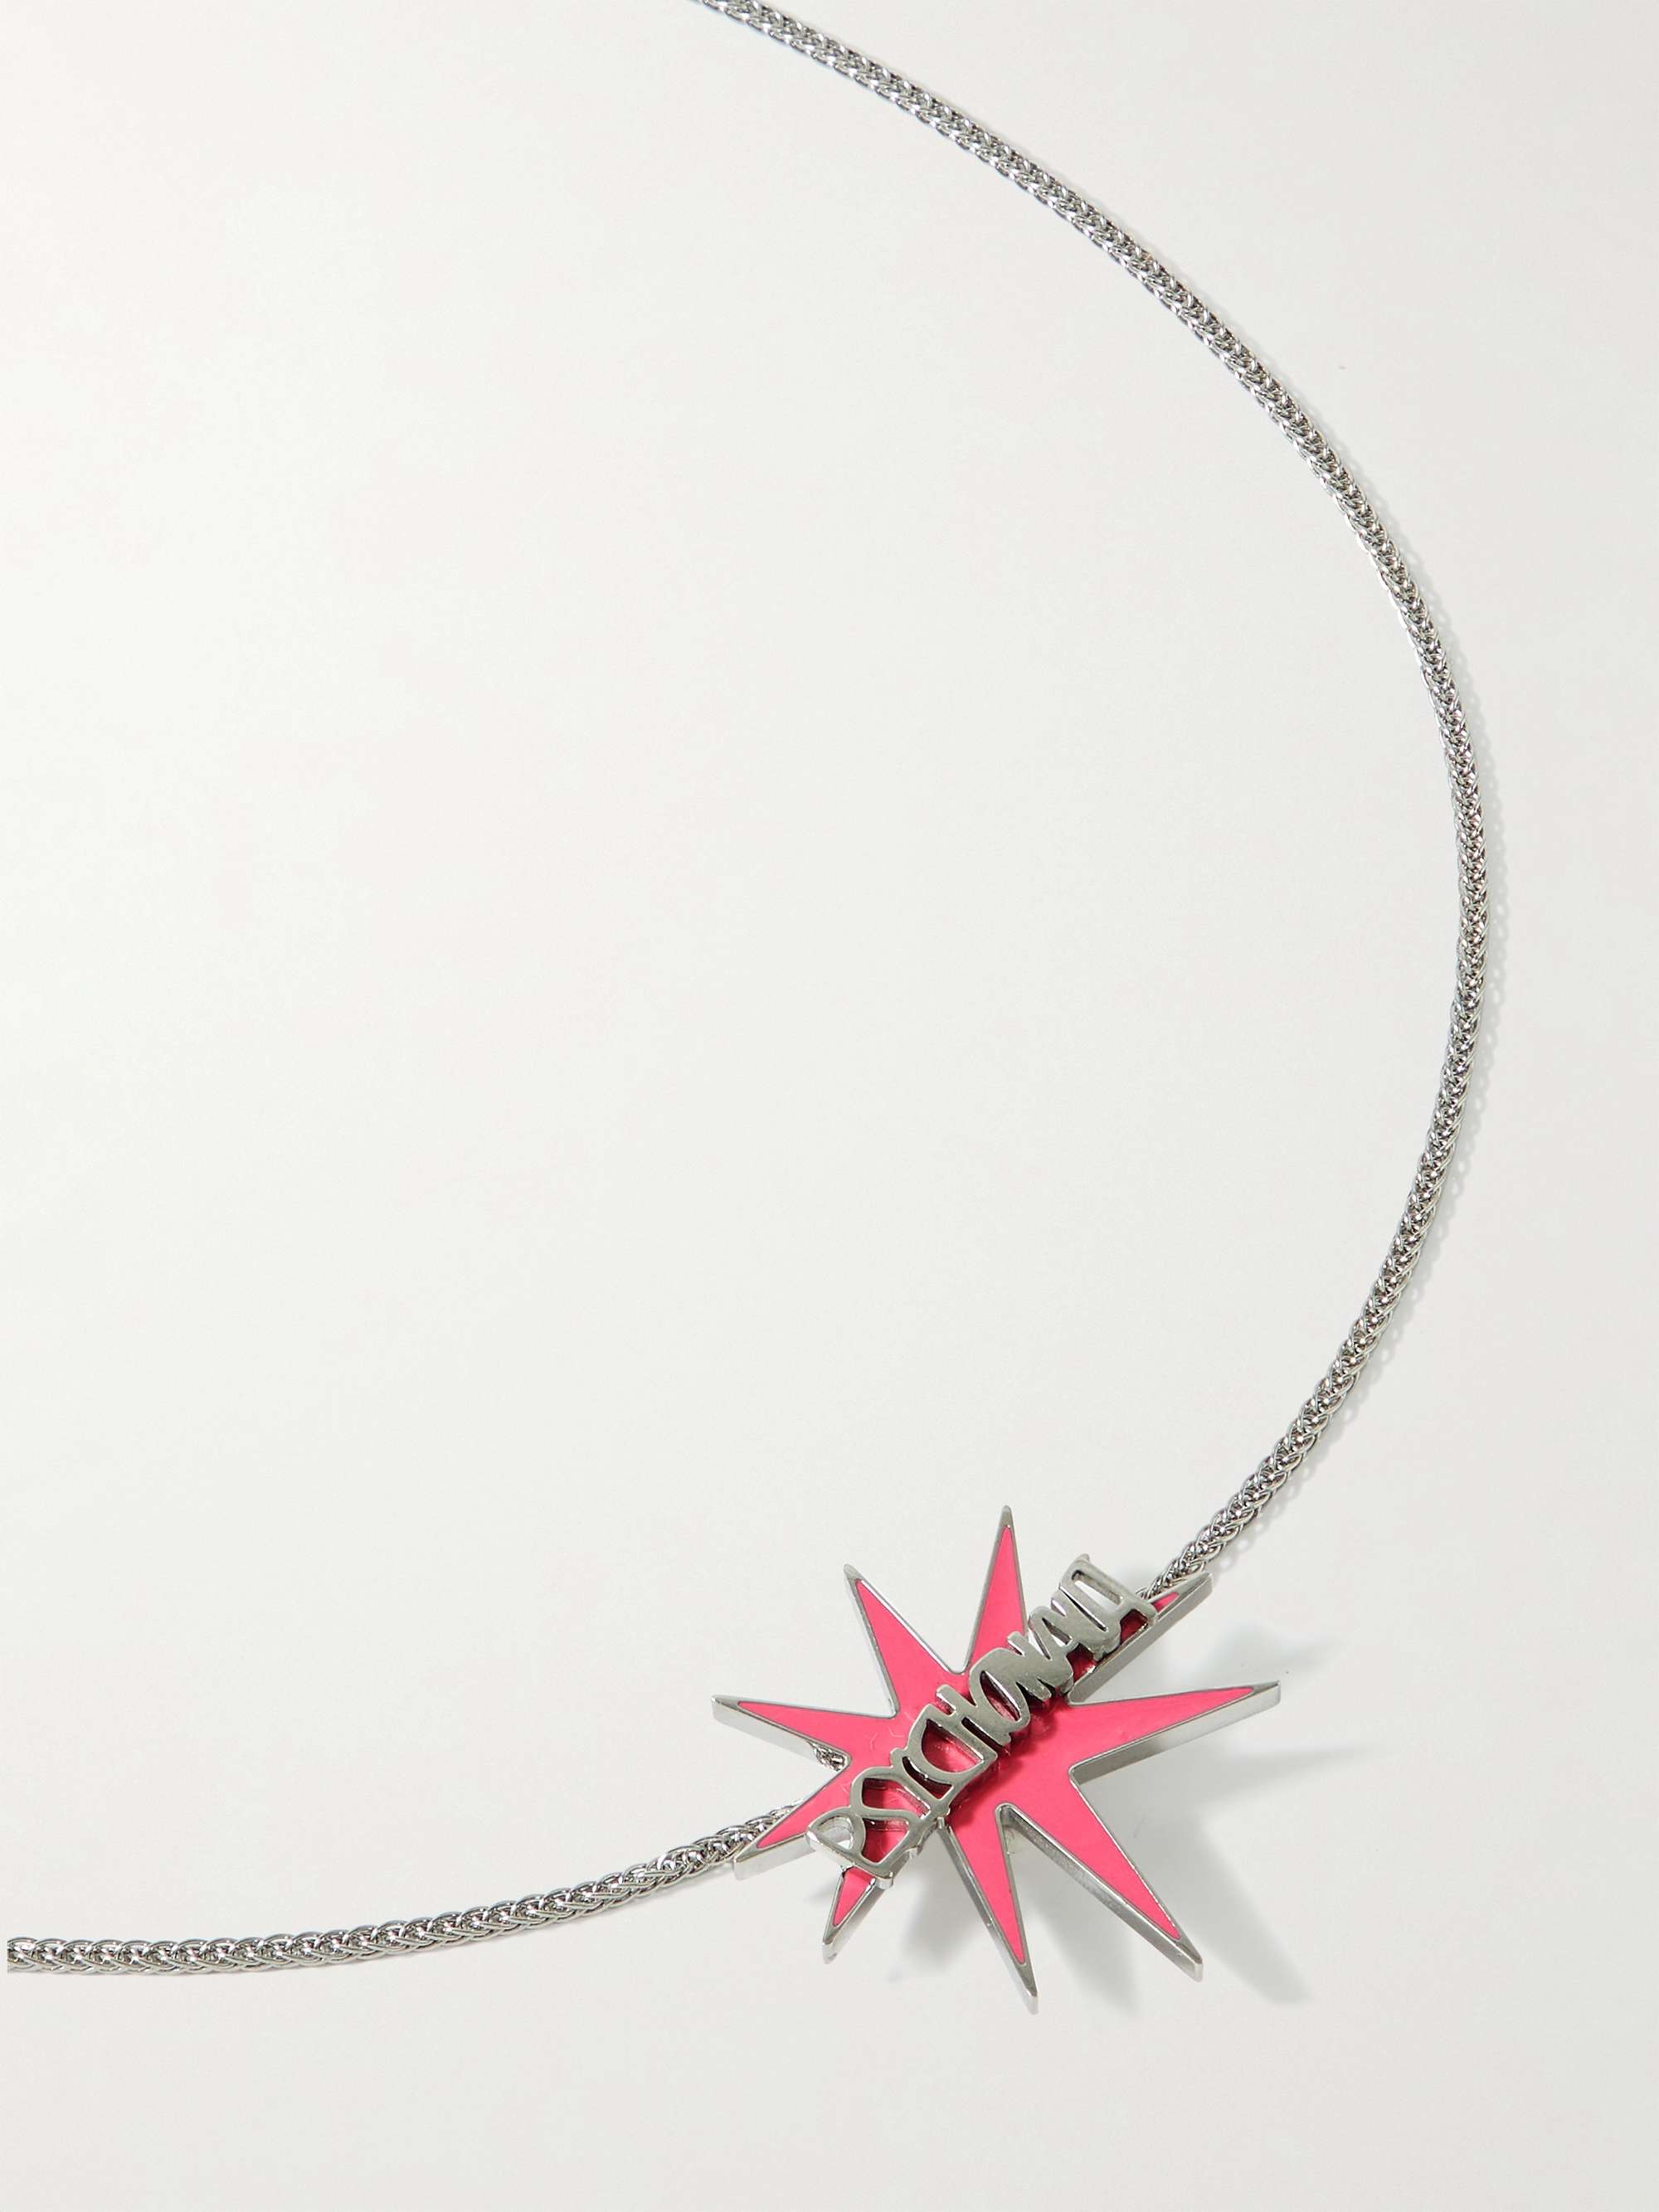 MSFTSREP Silver-Tone and Enamel Necklace